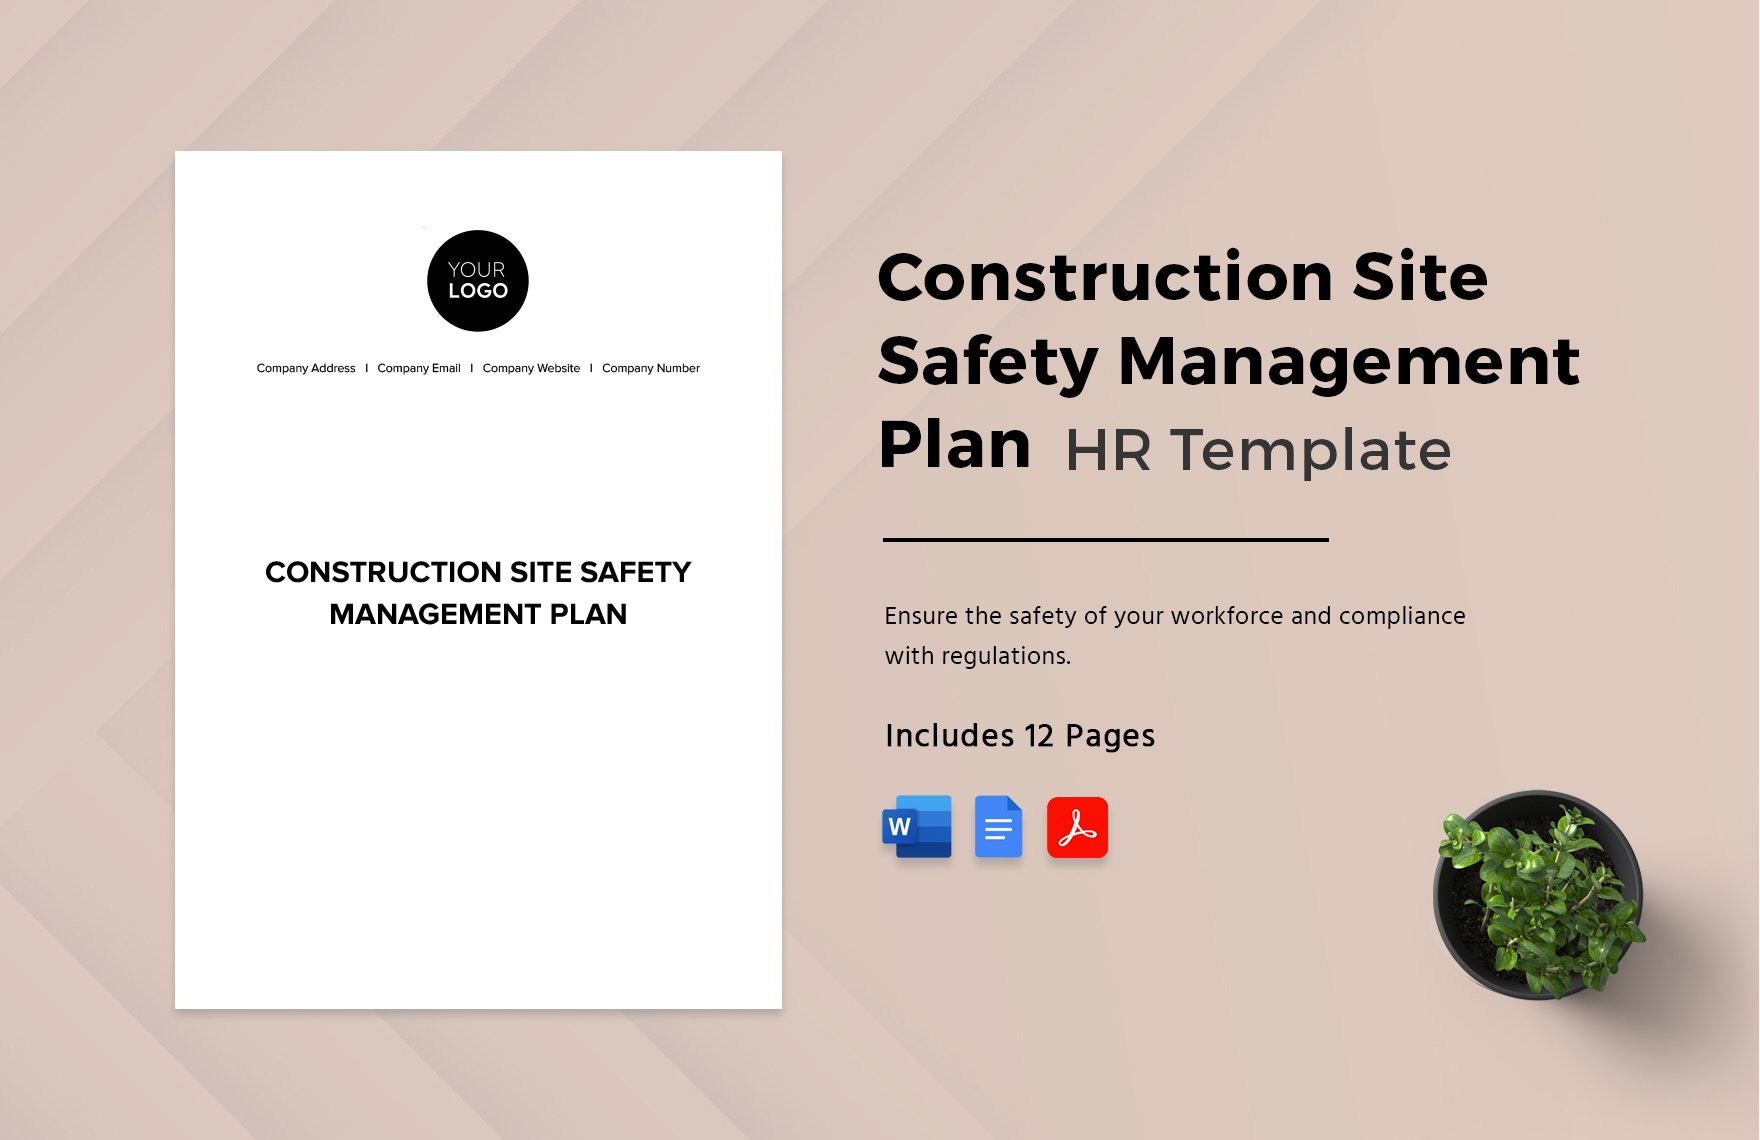 Construction Site Safety Management Plan HR Template in Word, Google Docs, PDF